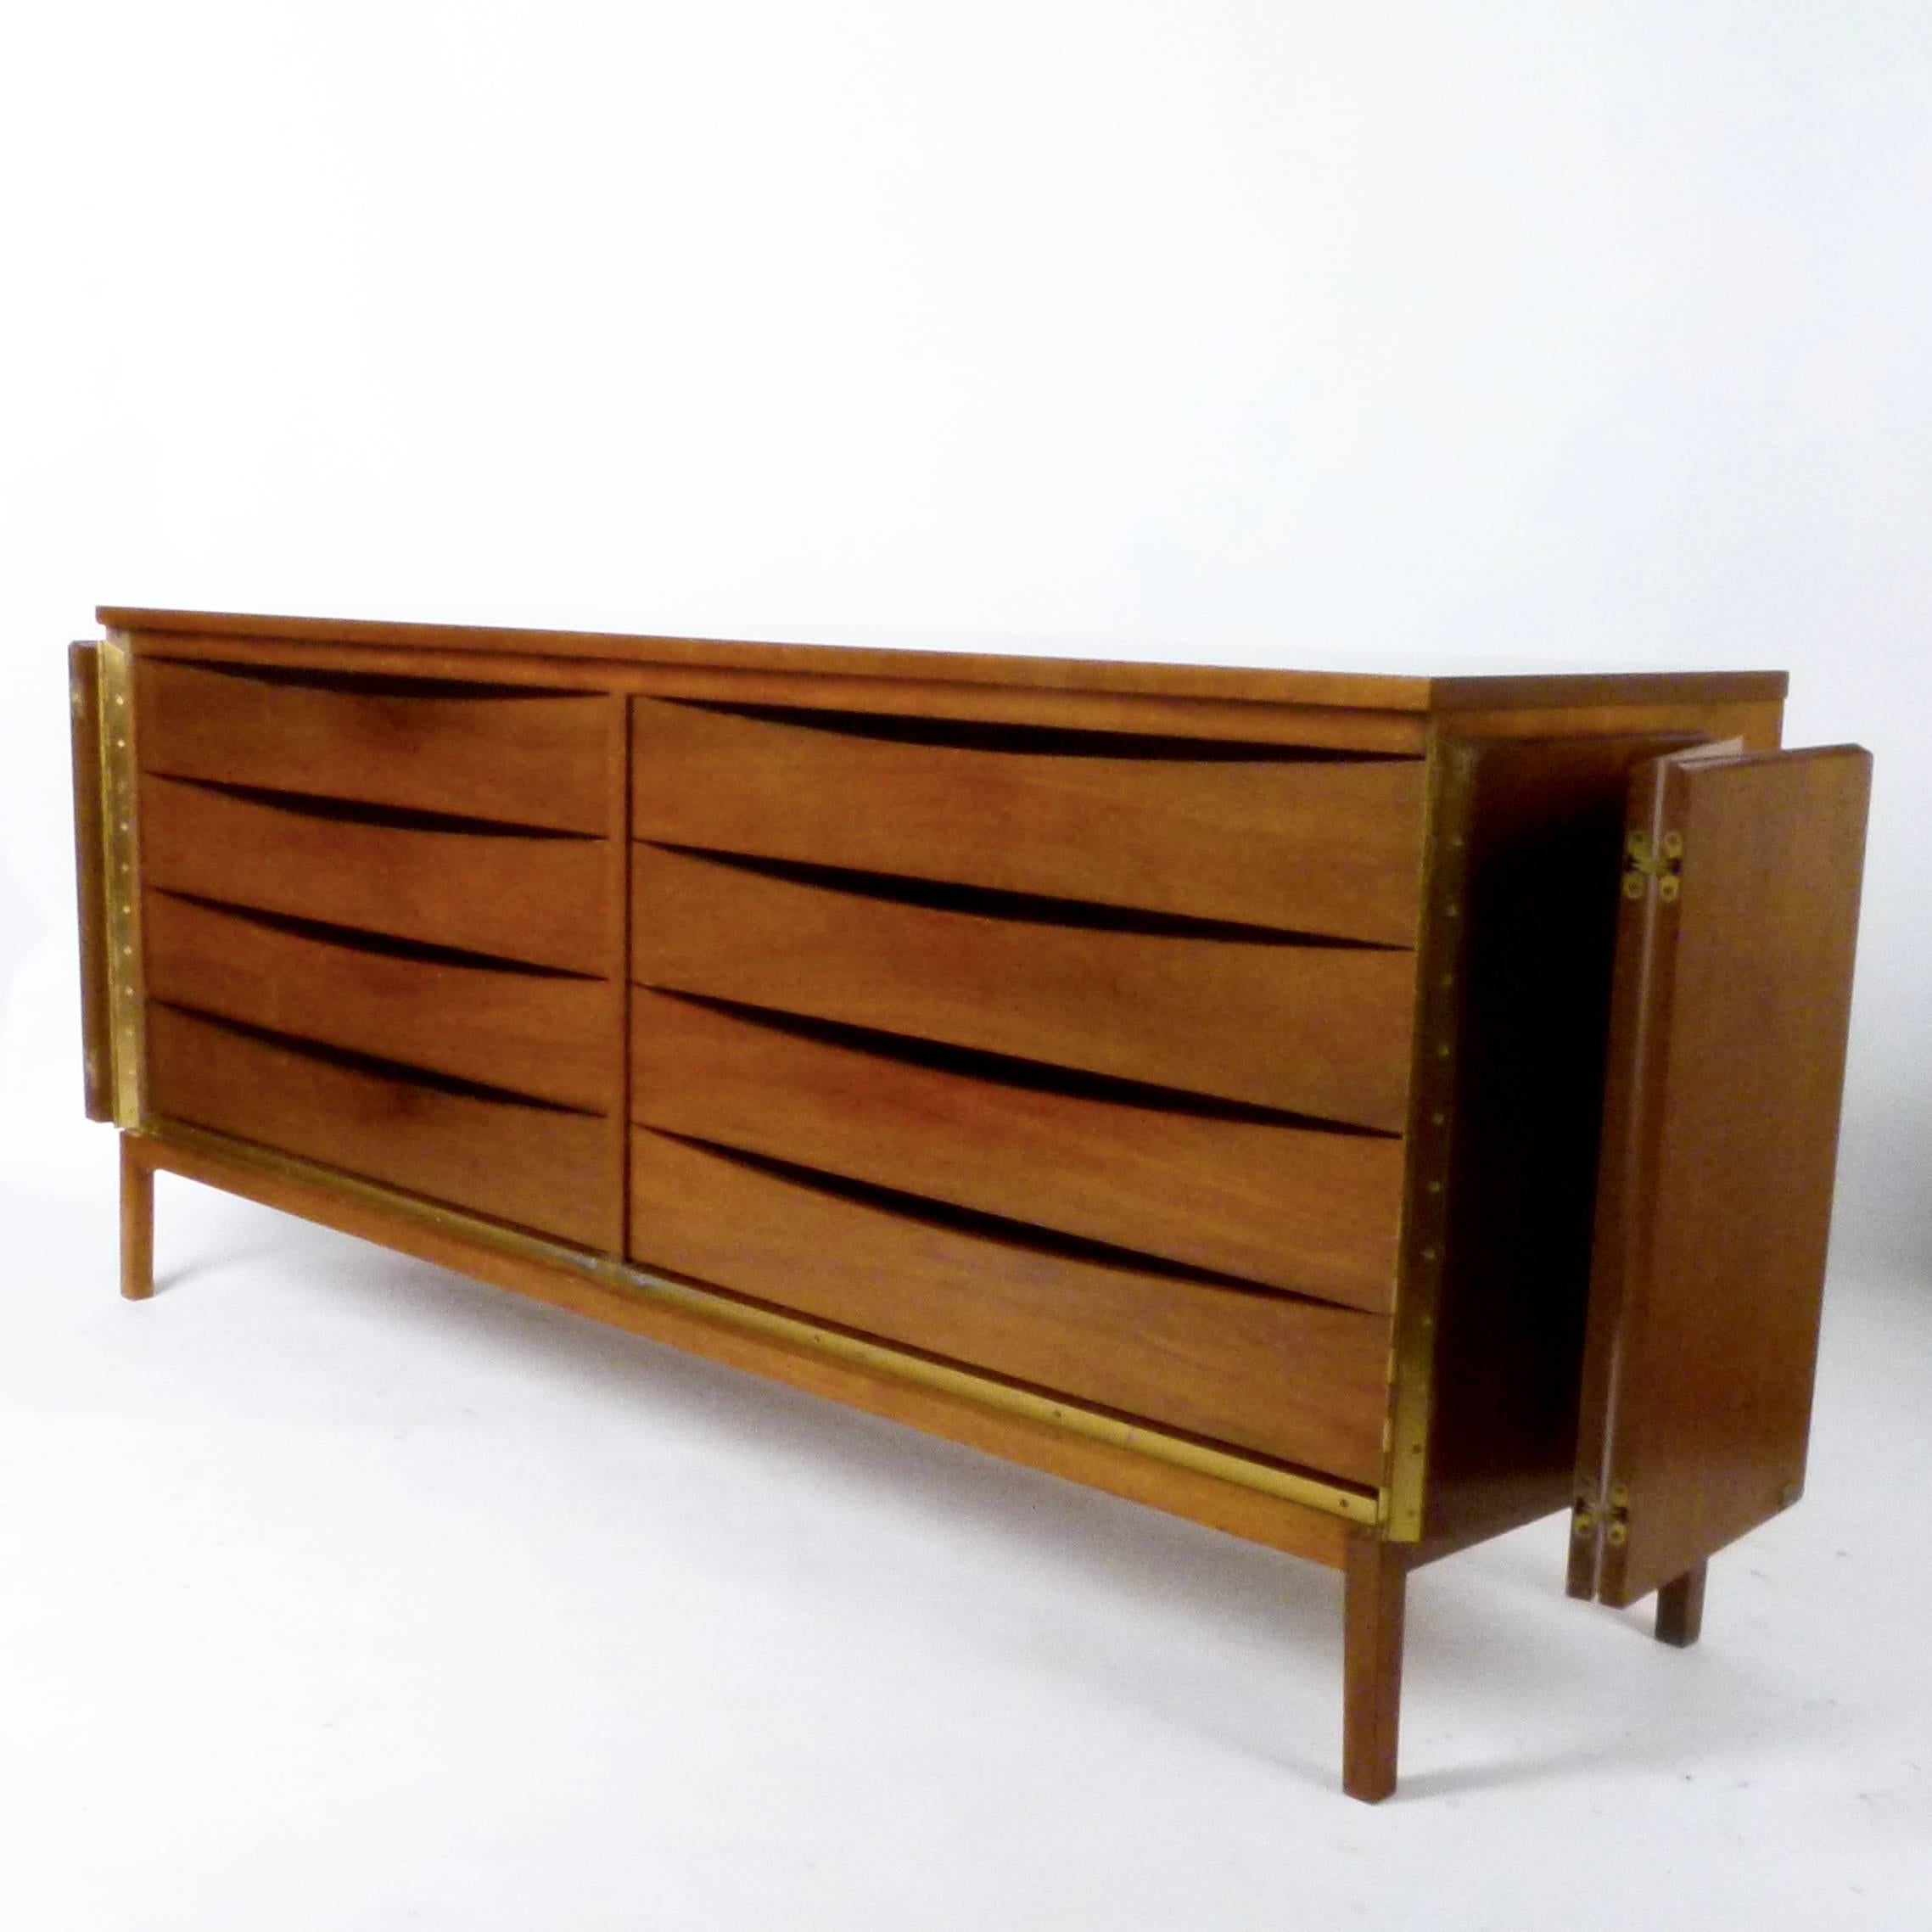 Walnut dresser with eight drawers behind two tri-fold doors by Paul McCobb from his Irwin collection for Calvin, circa 1960.